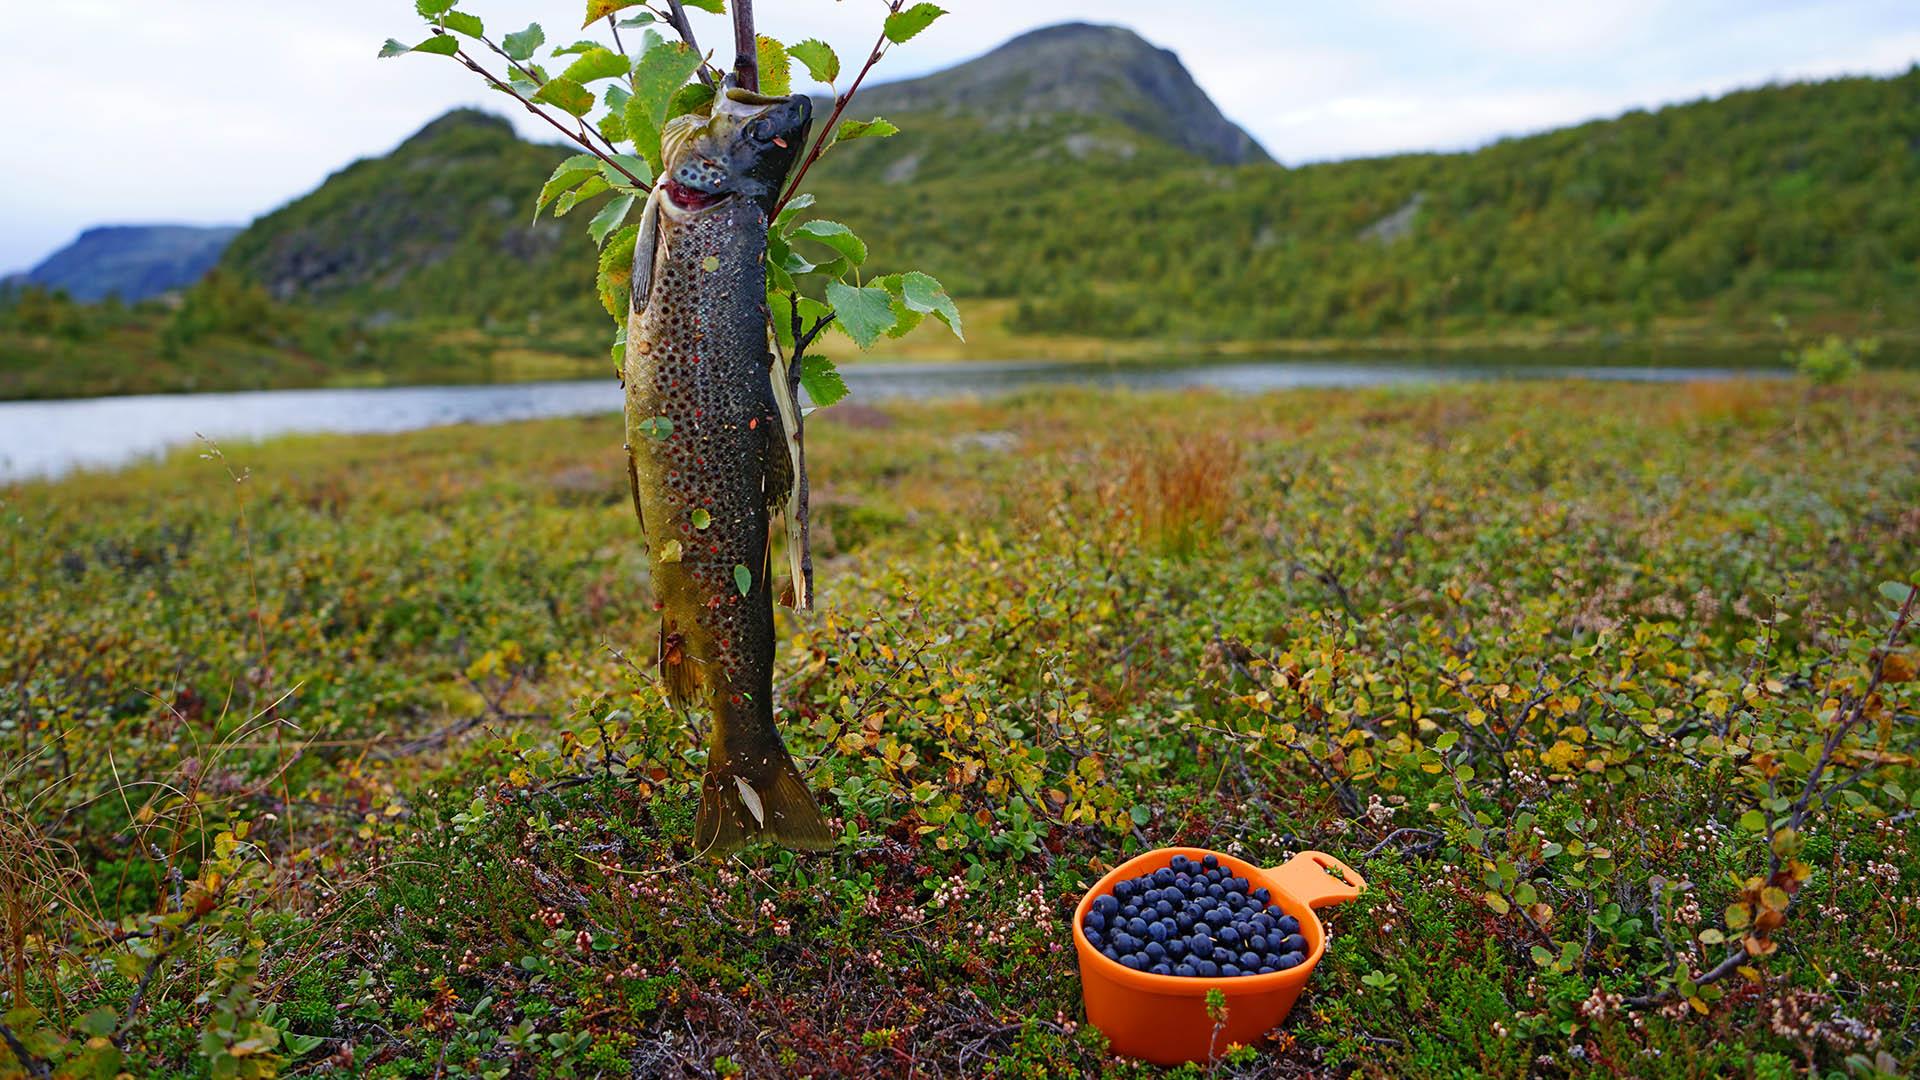 Autumn in the mountains. A cup full of blueberries and a freshly caught trout hanging on a birch branch. A lake and a mountain in the background.